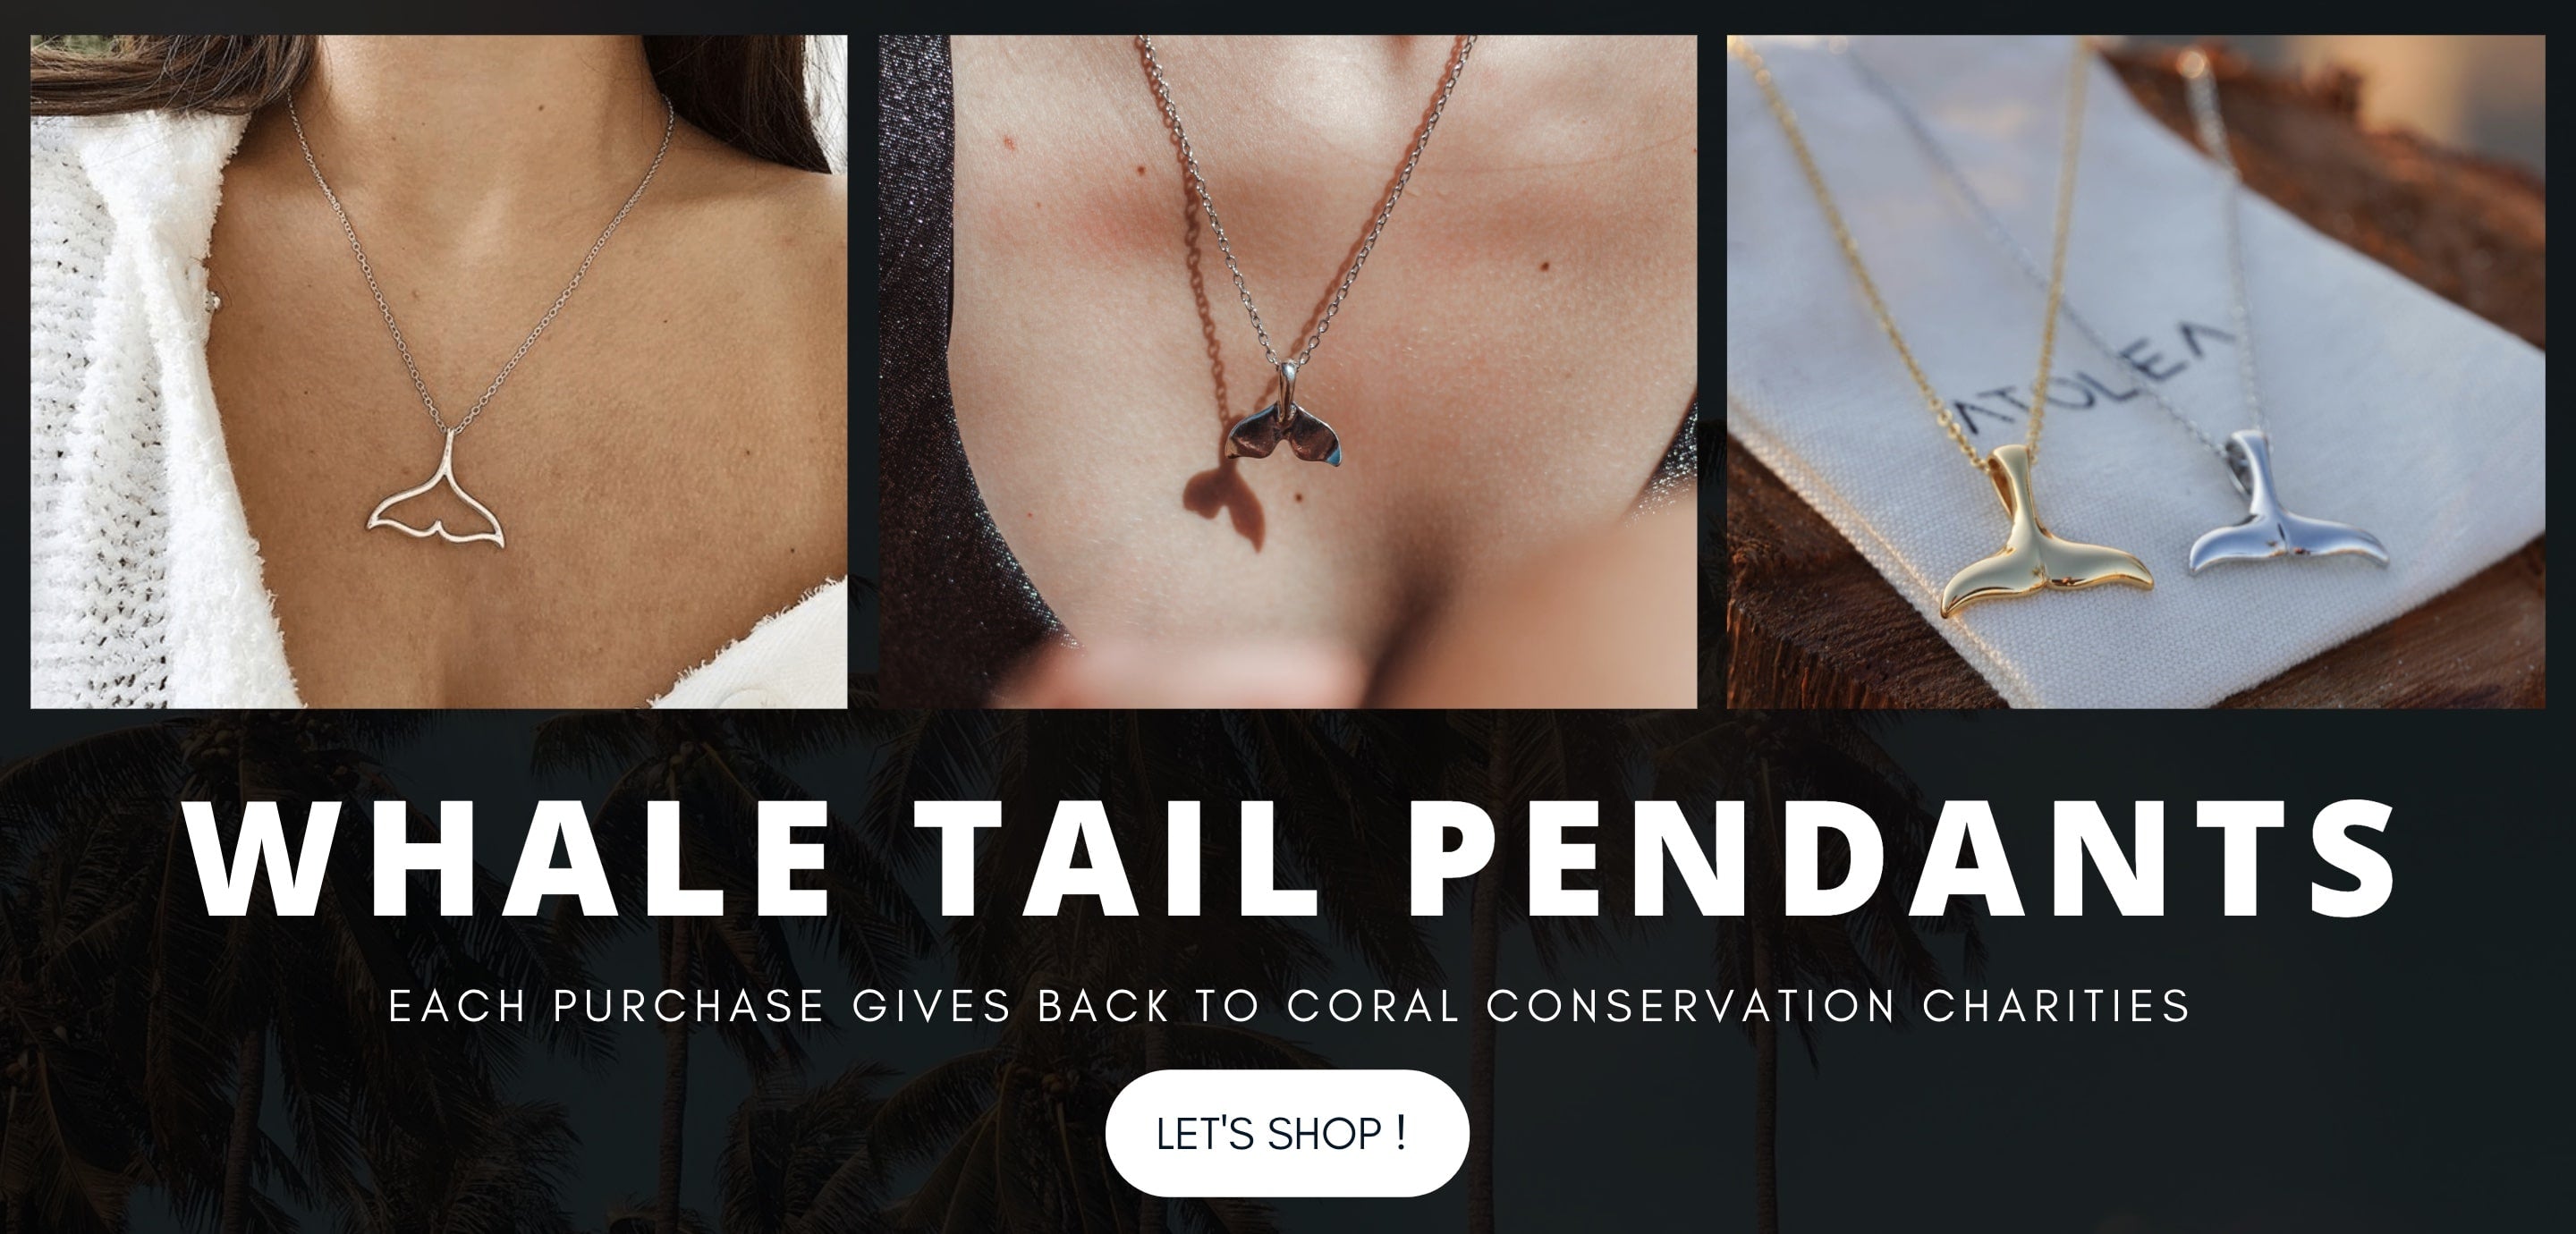 Whale Tail pendant meaning